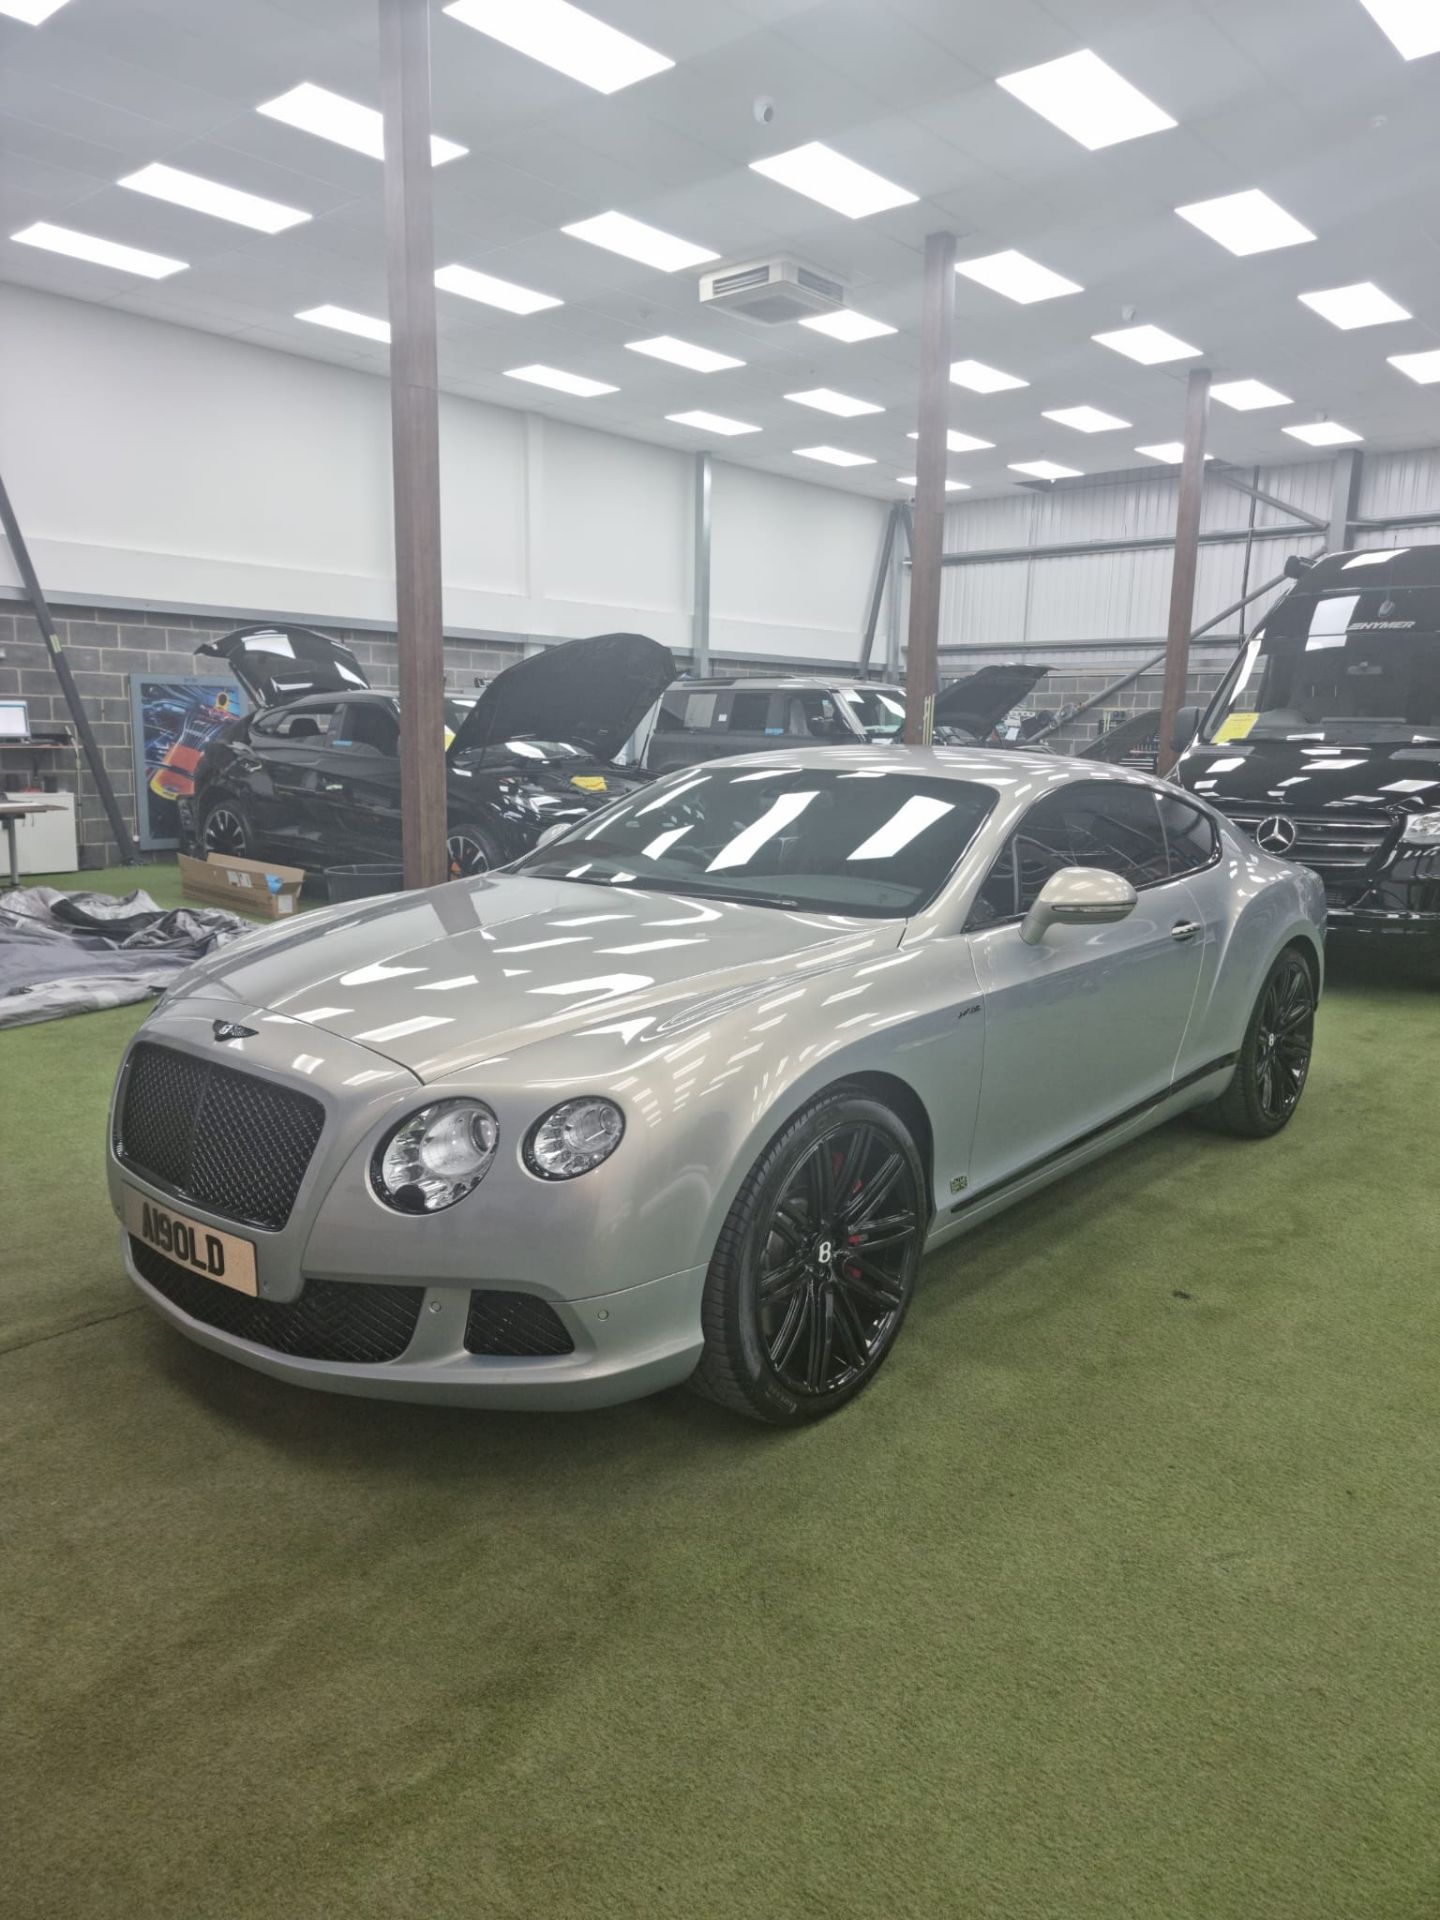 2013 BENTLEY CONTINENTAL GT SPEED AUTO GREY COUPE, 56k miles, 626 BHP, 5998 cc PETROL - Image 9 of 16